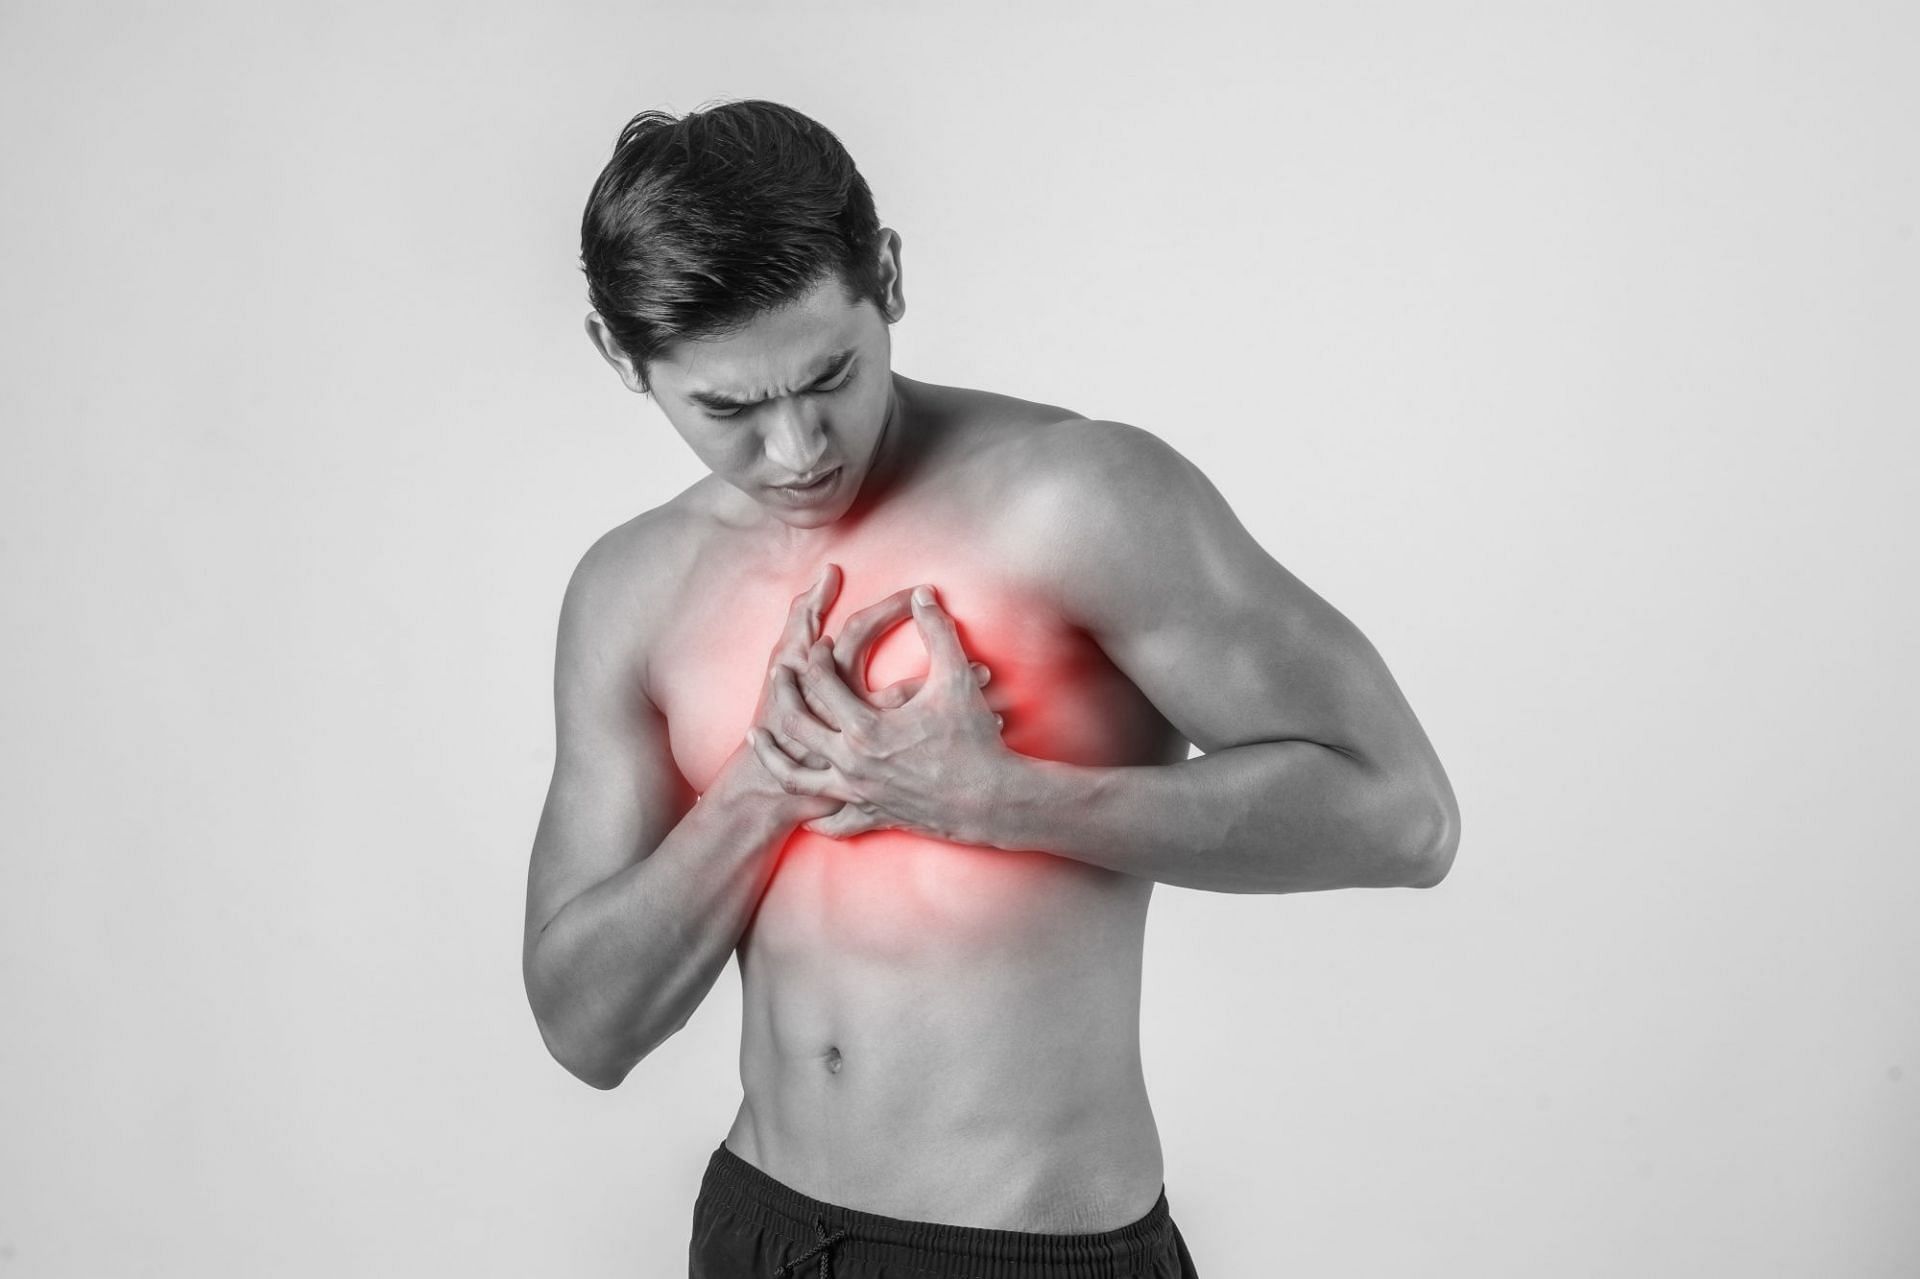 Signs of Heart attack can be observed a day before (Image by jcomp on Freepik)